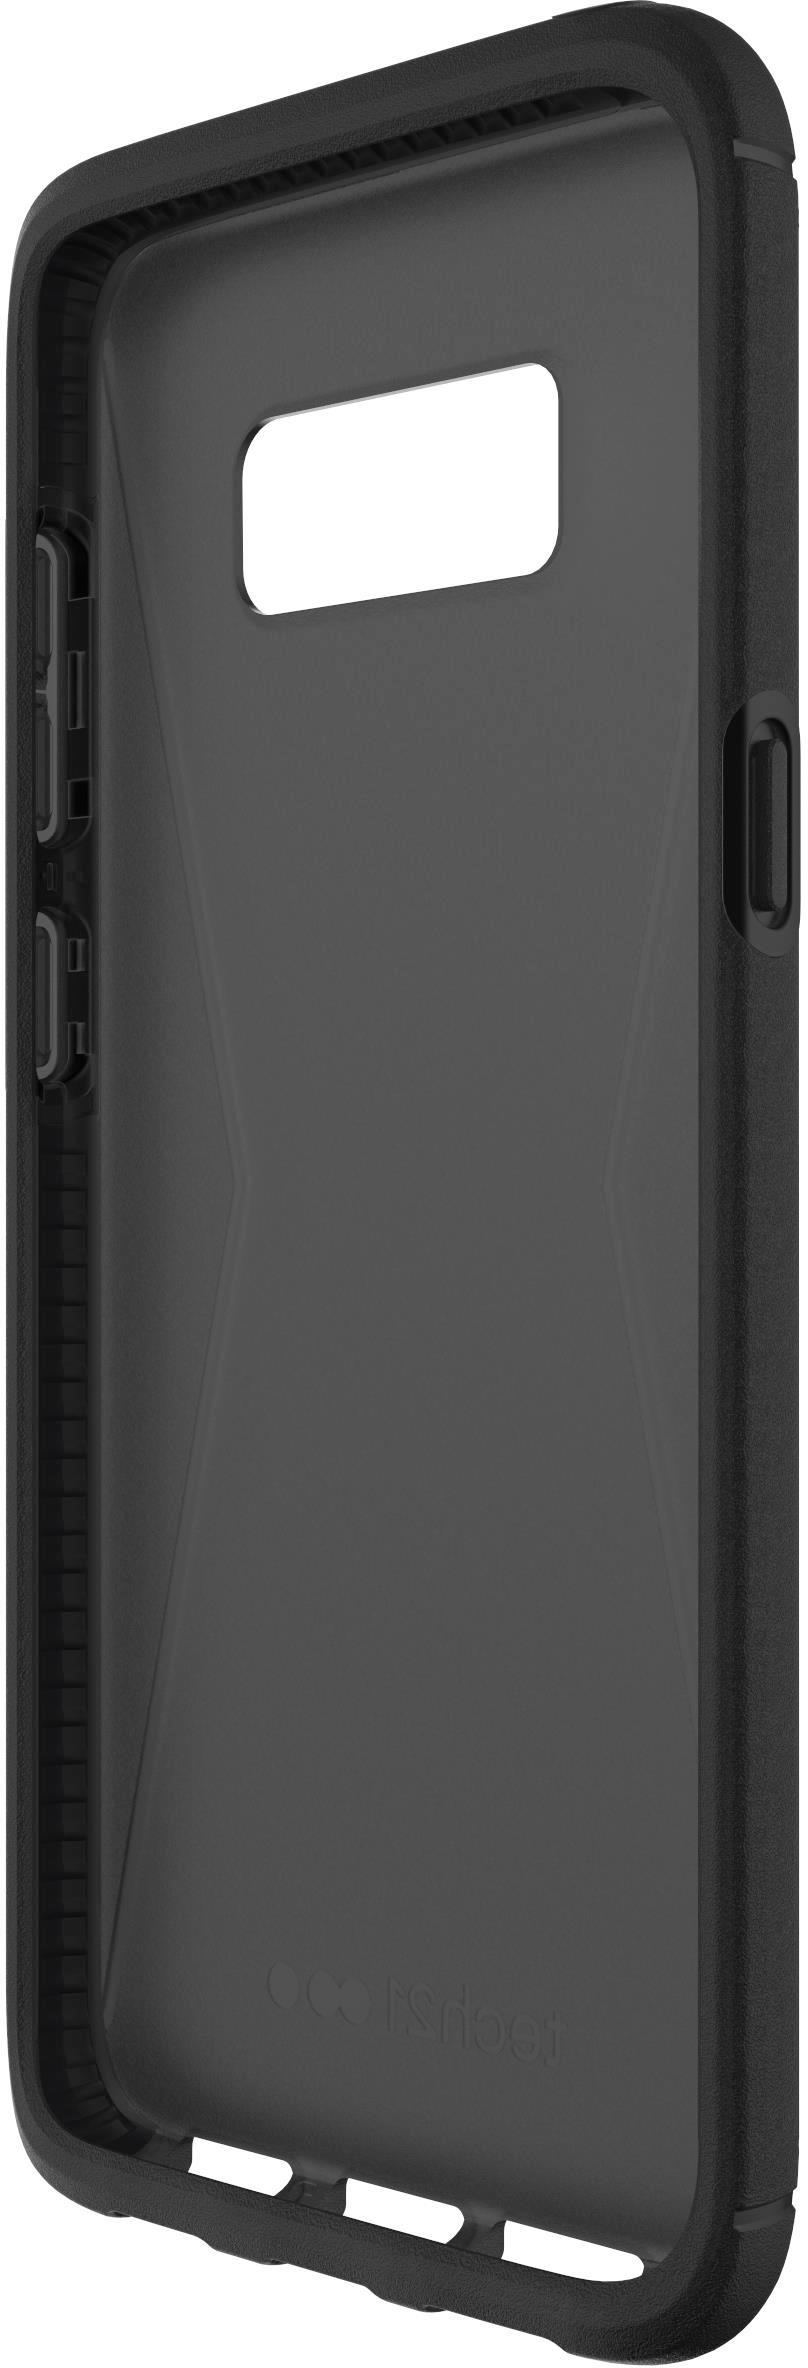 Best Buy: Tech21 Evo Tactical Case for Samsung Galaxy S8 Black 48709BBR